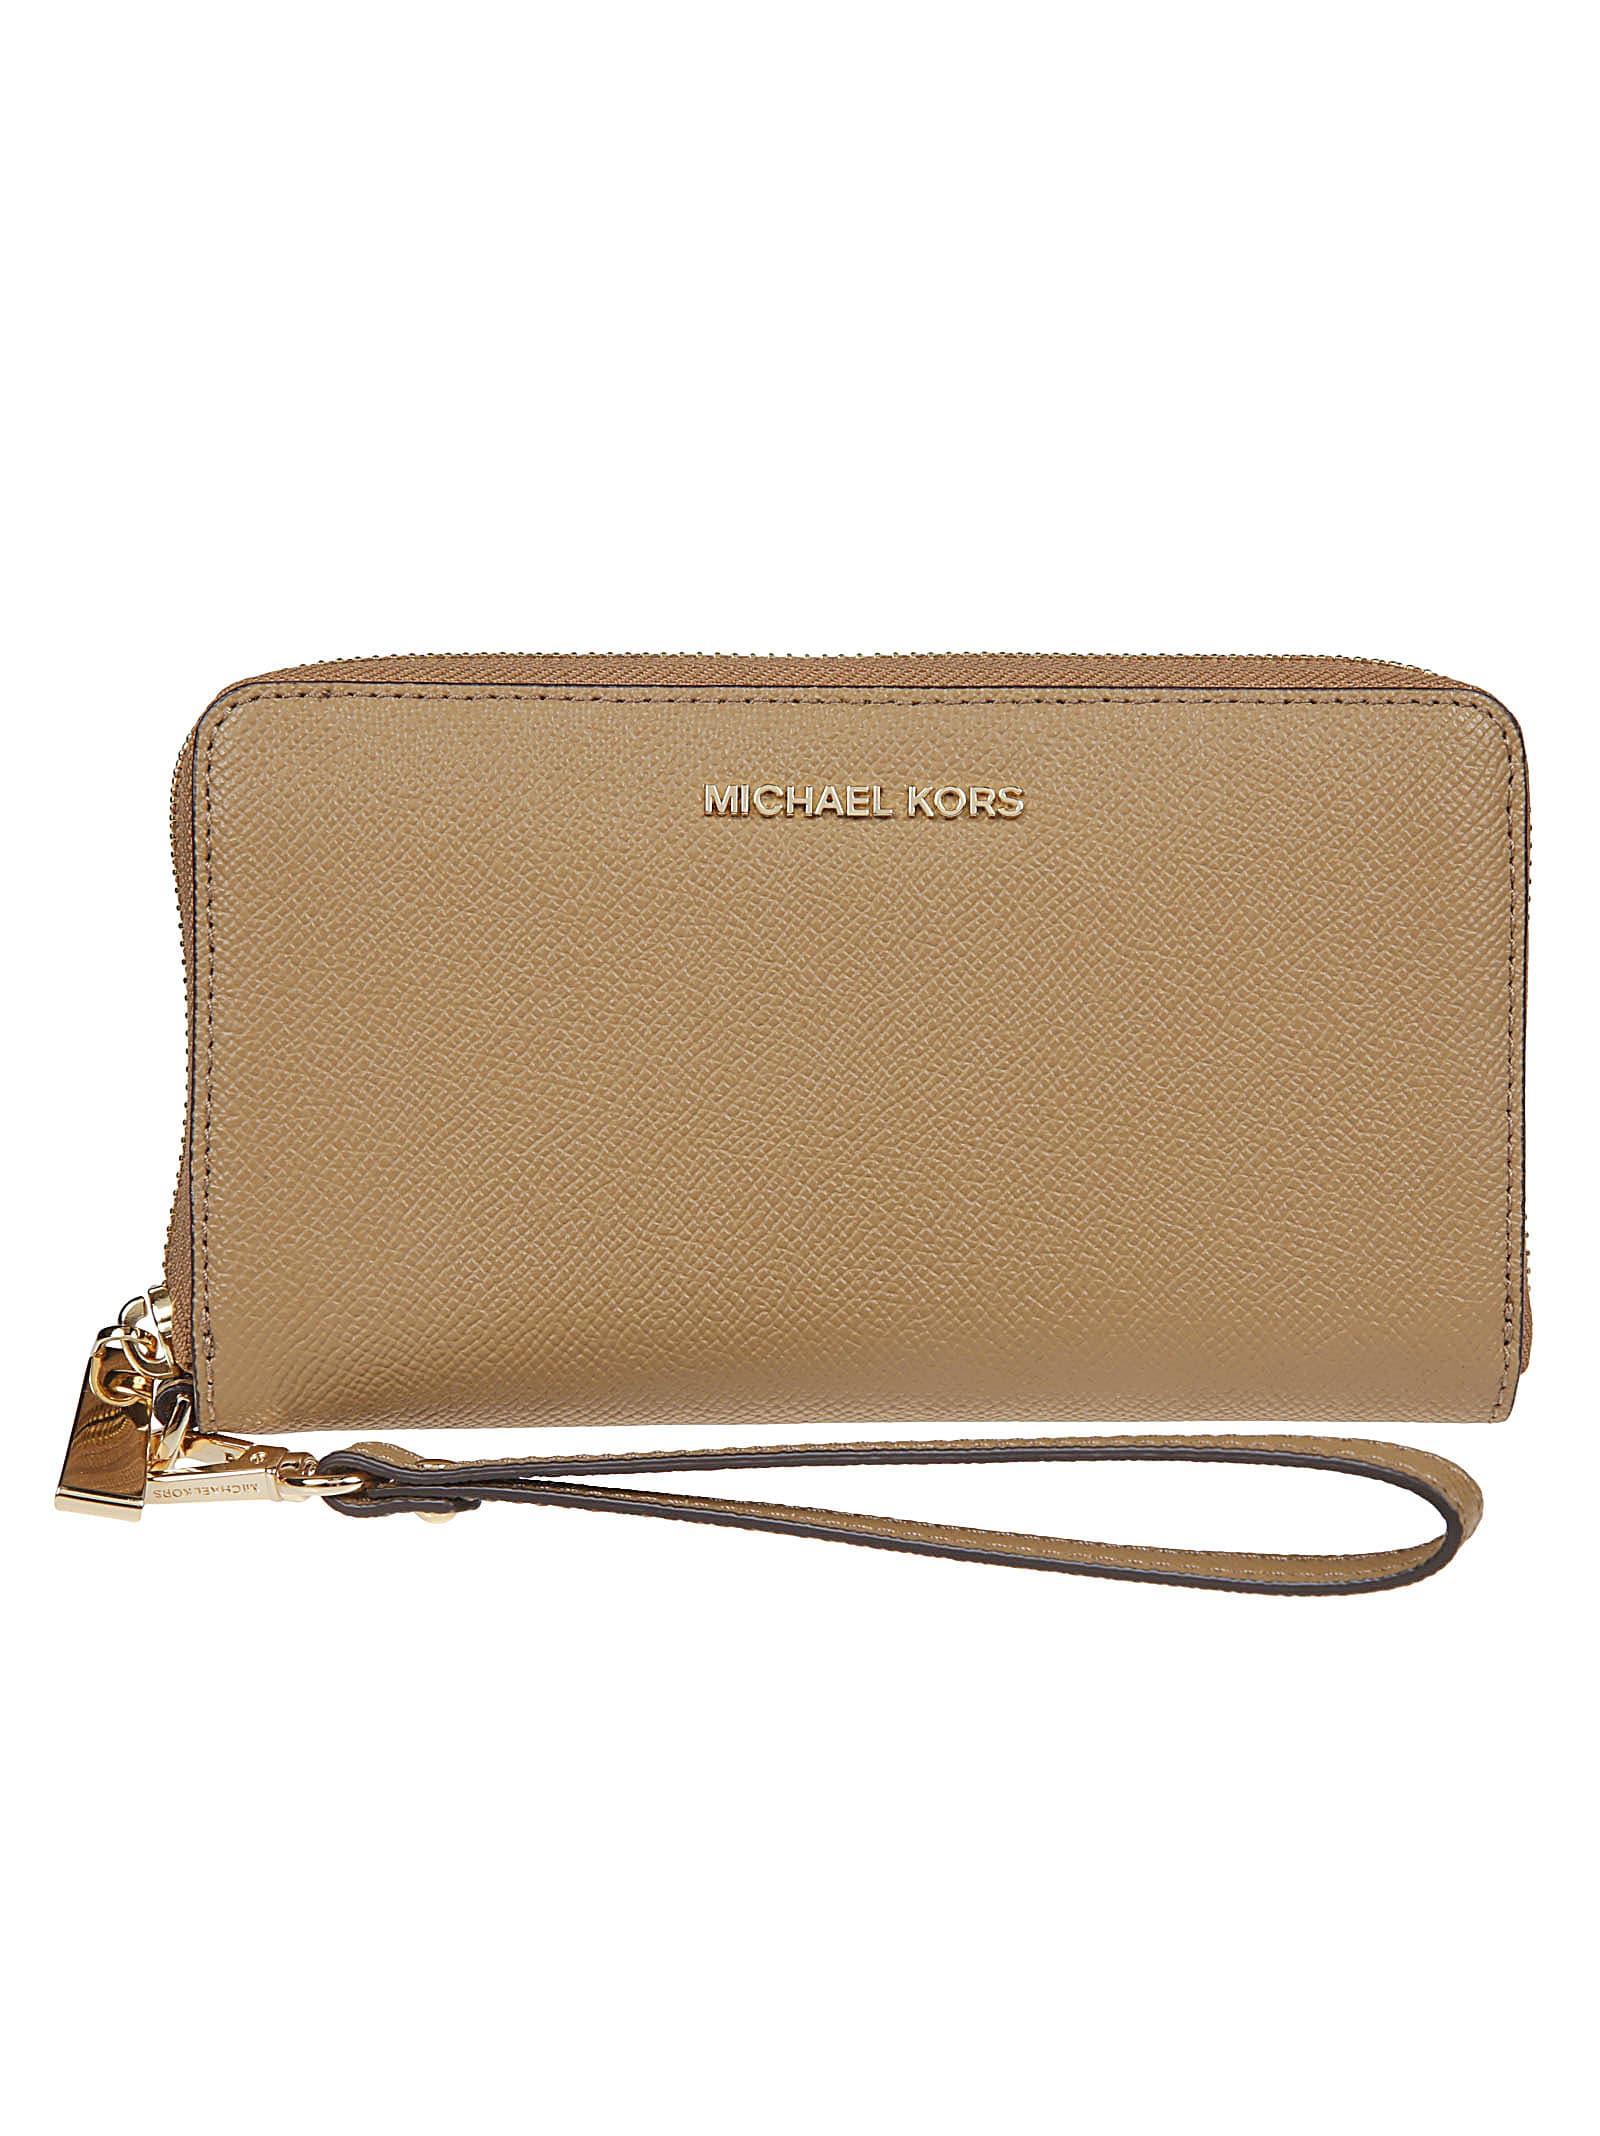 Michael Kors Large Coin Phone Case in Natural